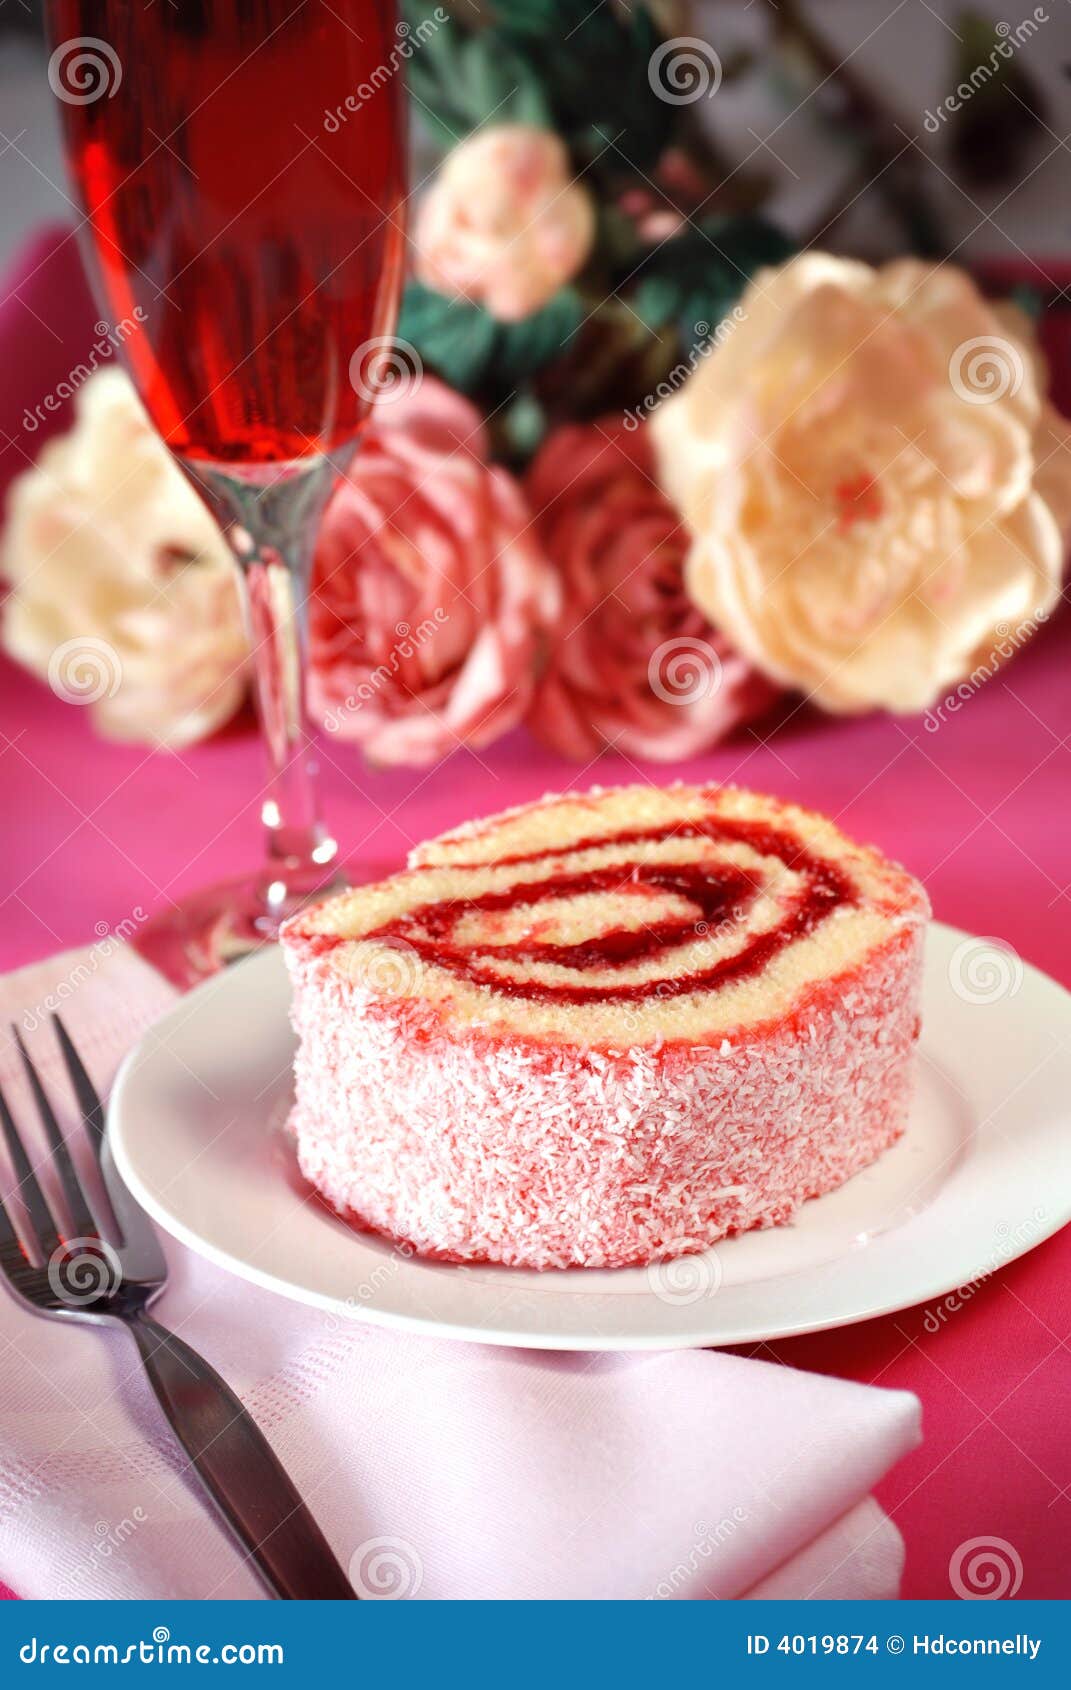 Strawberry jelly roll stock photo. Image of cake, delicious - 4019874